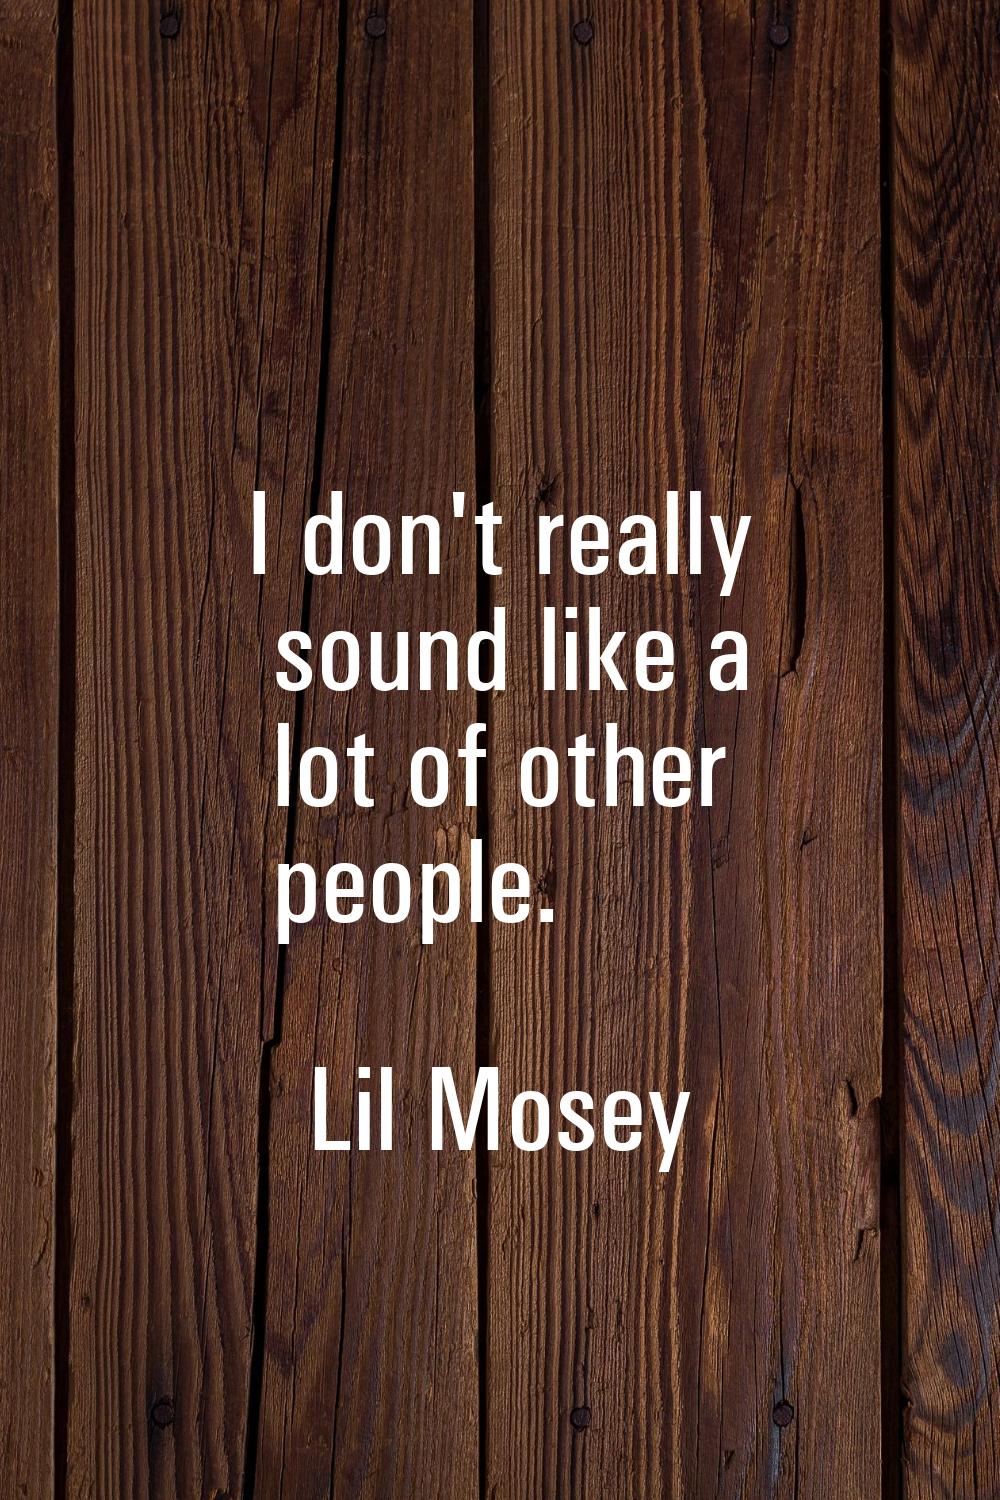 I don't really sound like a lot of other people.